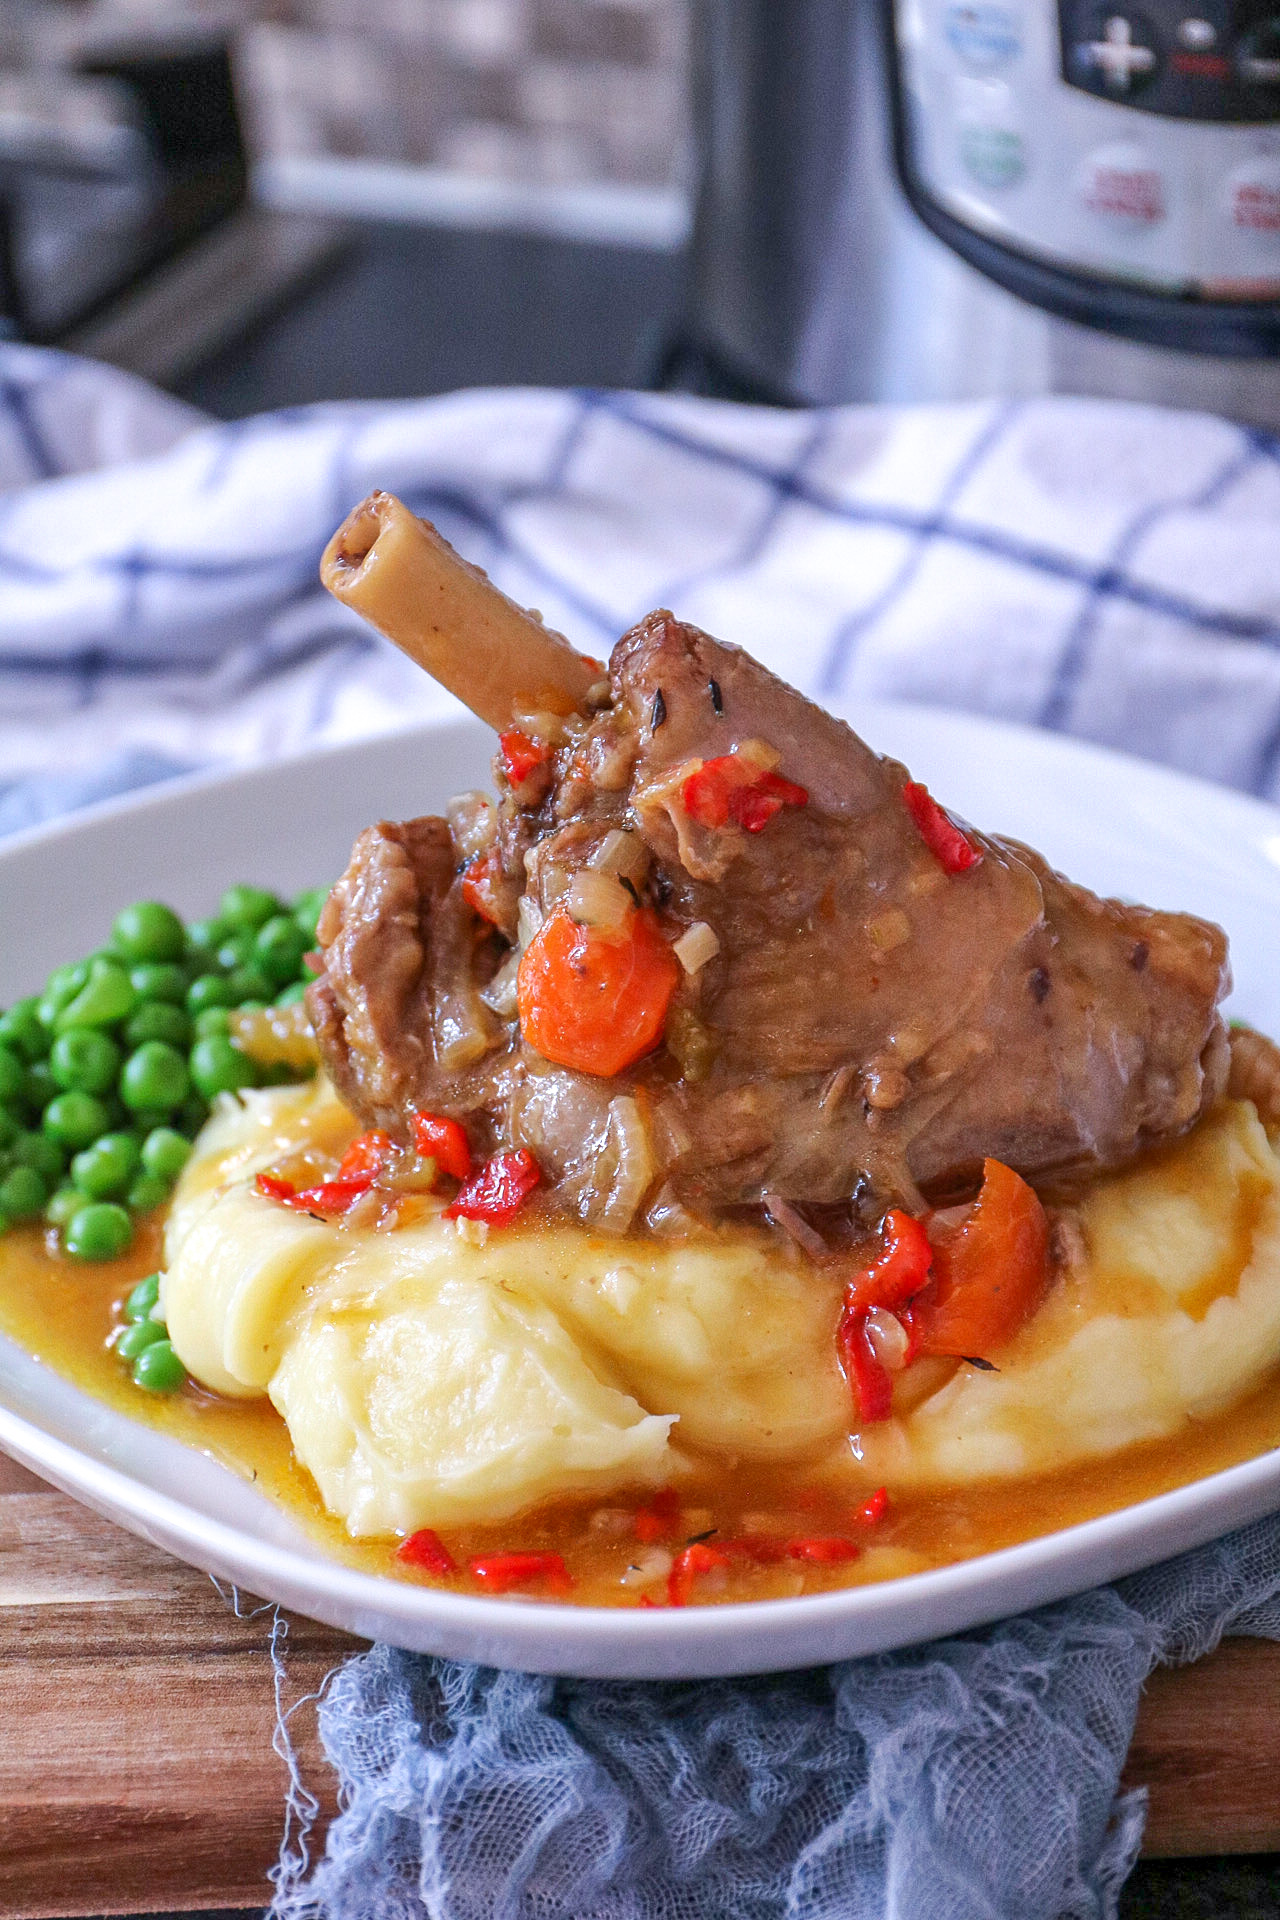 Braise It: Hearty Lamb Shanks With Figs And Rosemary